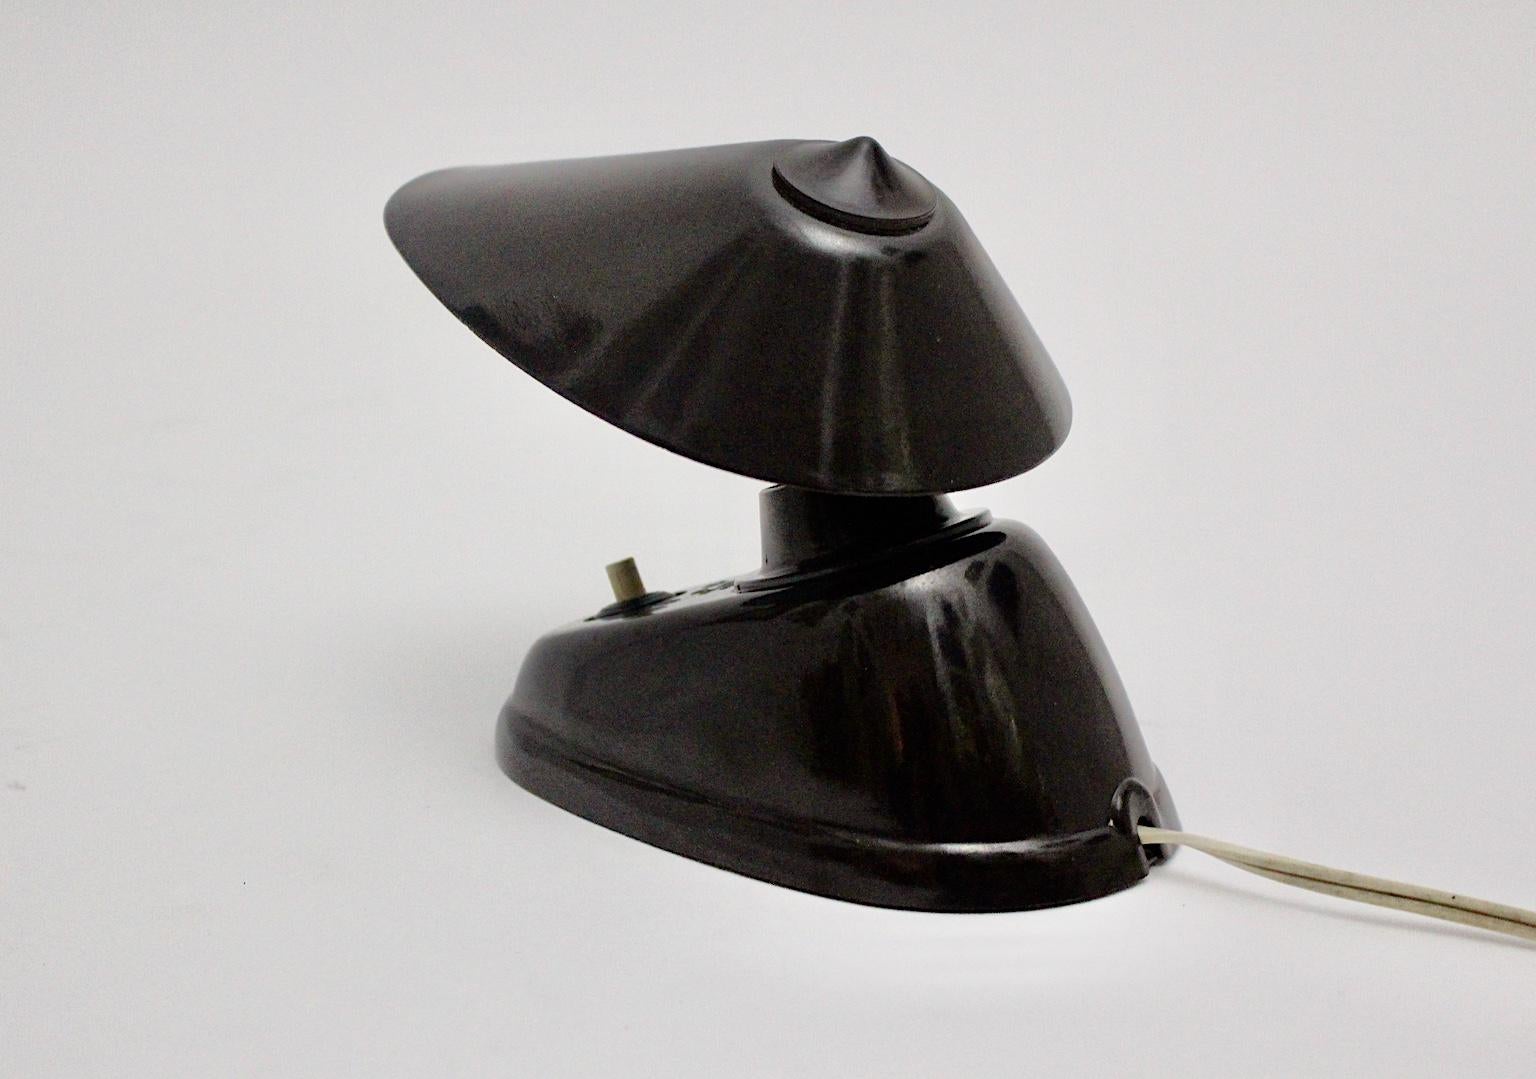 A streamlined Moderne Art Deco brown vintage Bakelite wall lamp or table lamp, which was designed and manufactured 1920s in Czechoslovakia.
The table lamp shows a base with one E 14 socket and an on/off switch, while the adjustable lamp shade